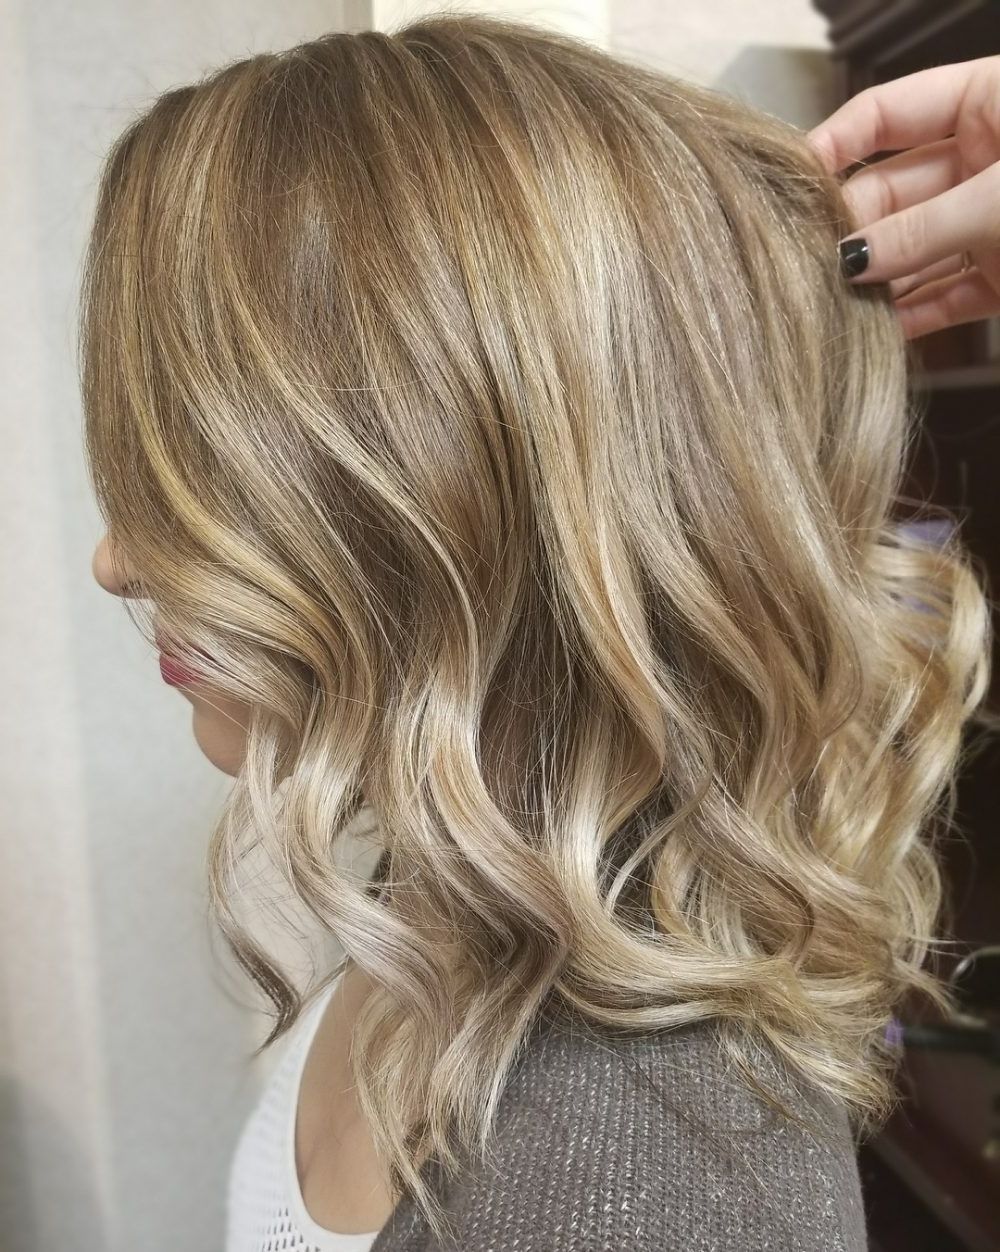 21 Hottest Honey Blonde Hair Color Ideas Of 2018 Throughout Current Multi Tonal Golden Bob Blonde Hairstyles (Gallery 20 of 20)